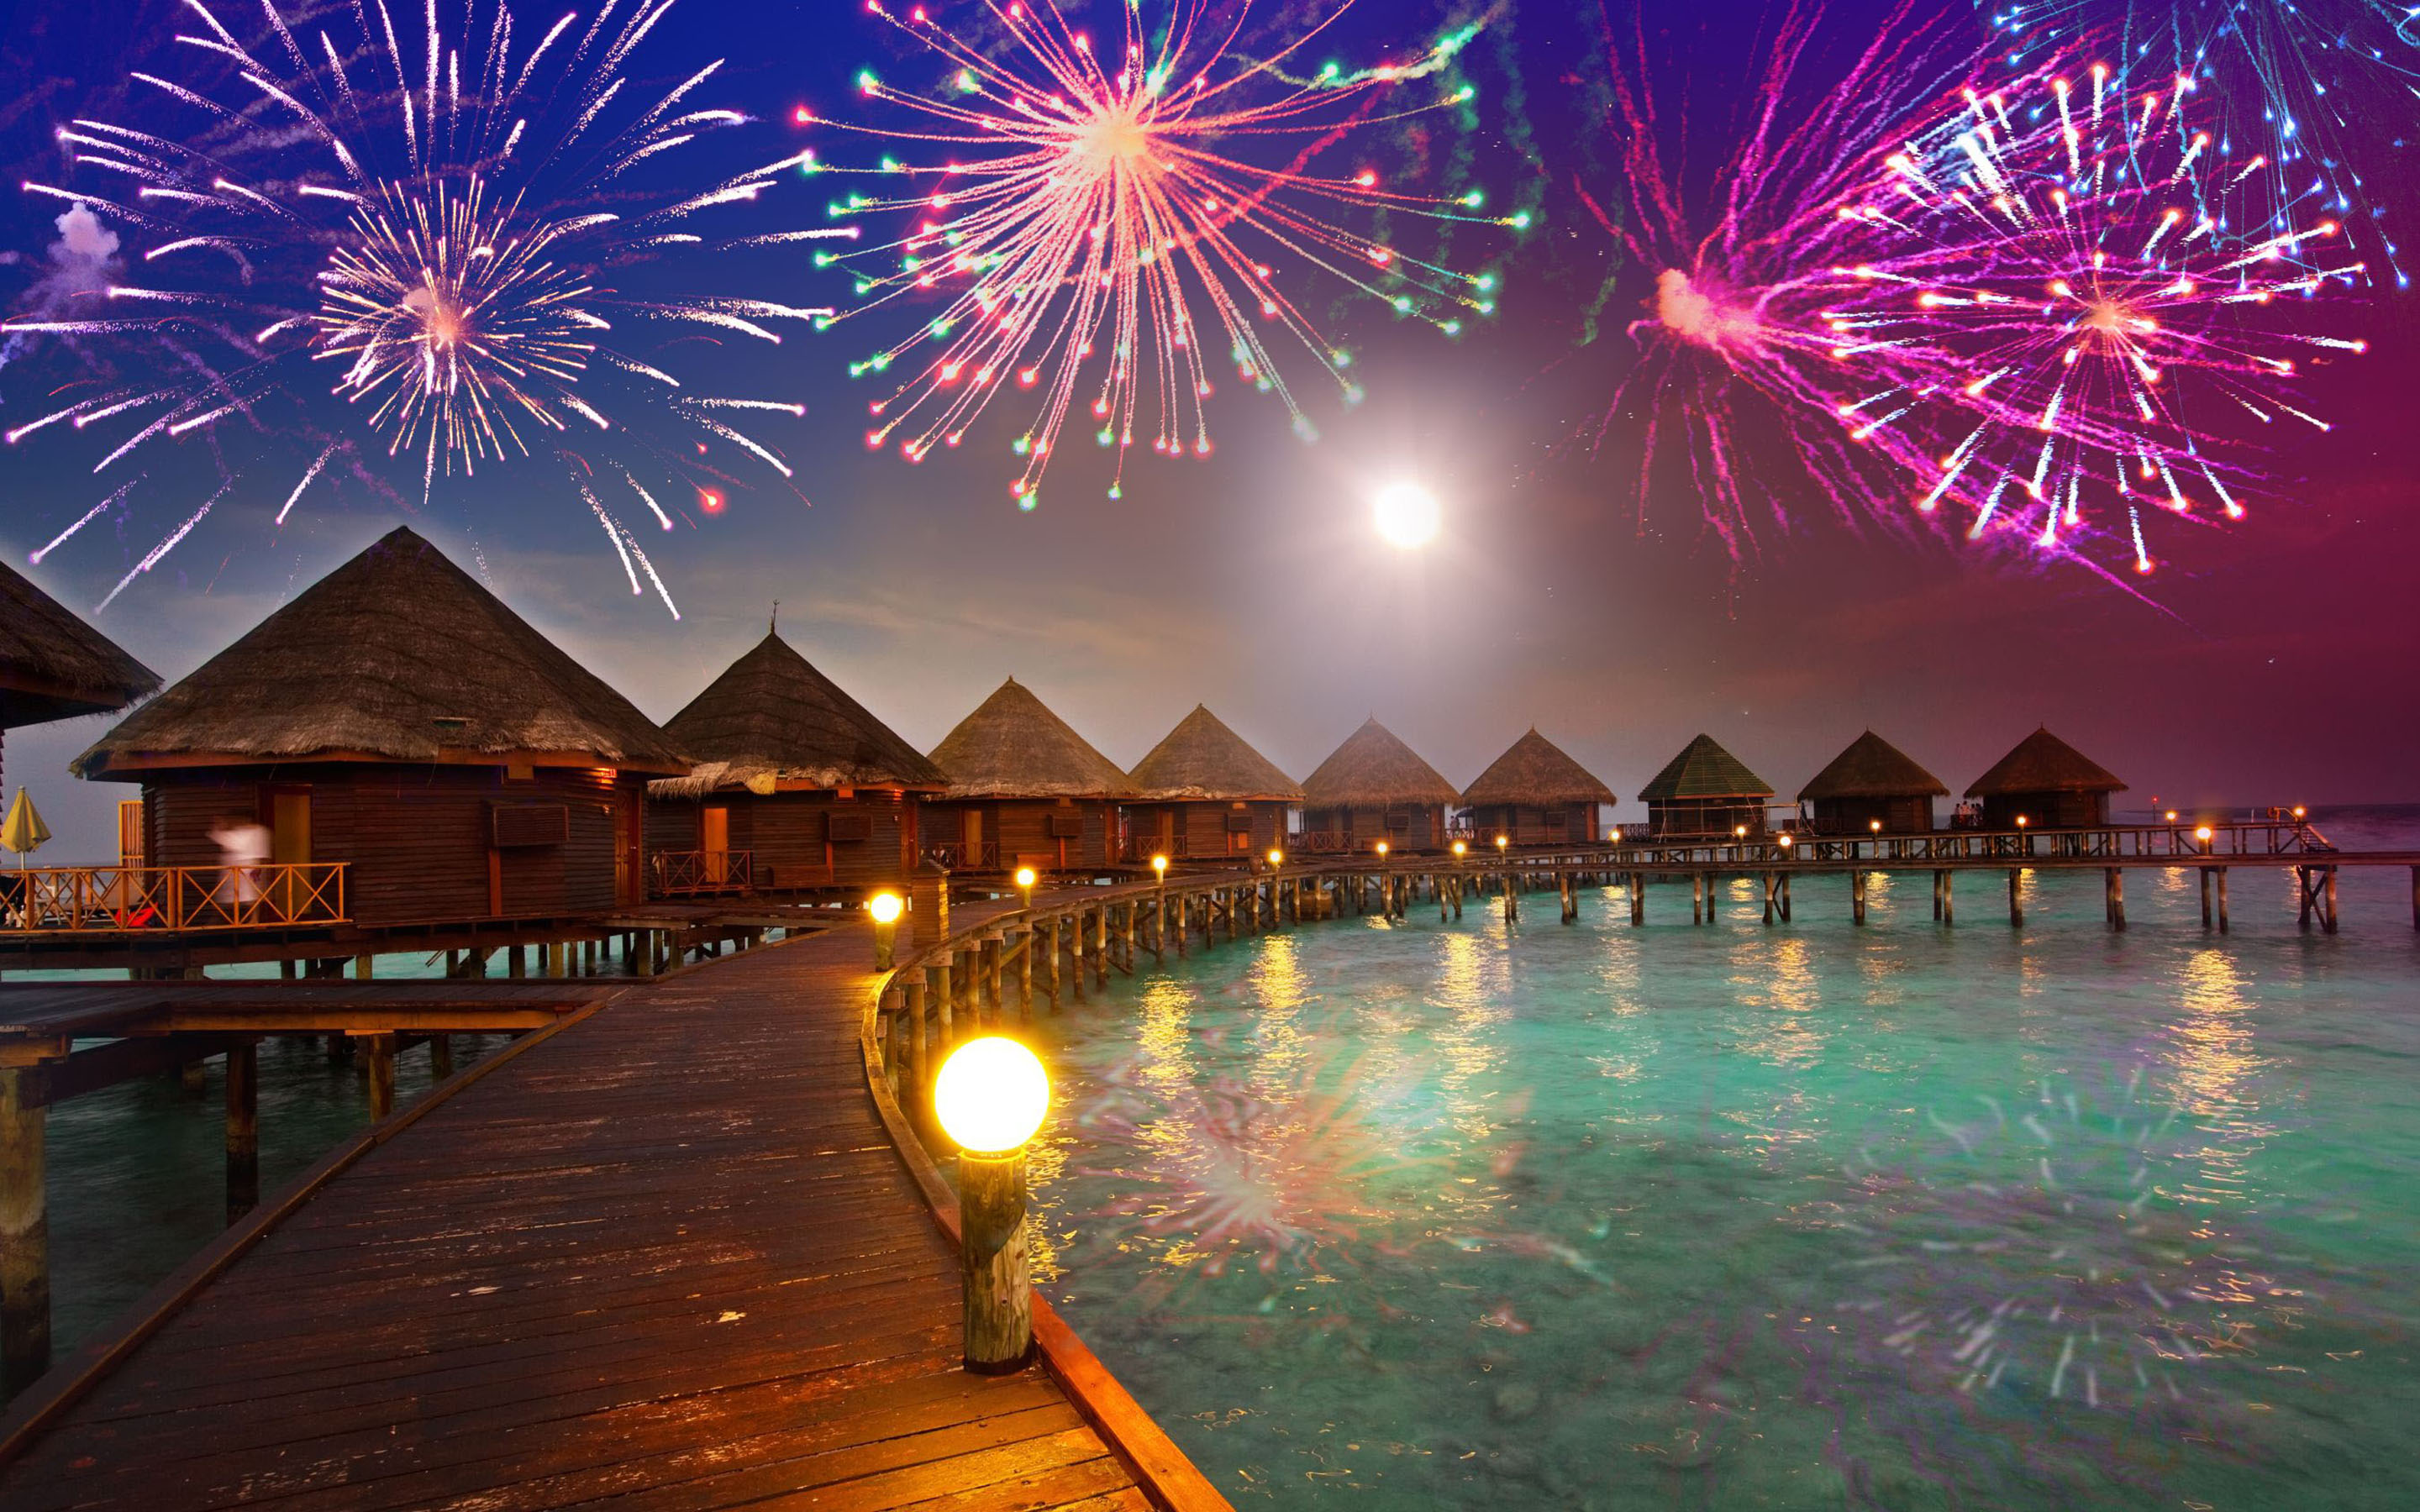 Christmas And New Year In Maldives Hd Desktop Wallpaper For Mobile And